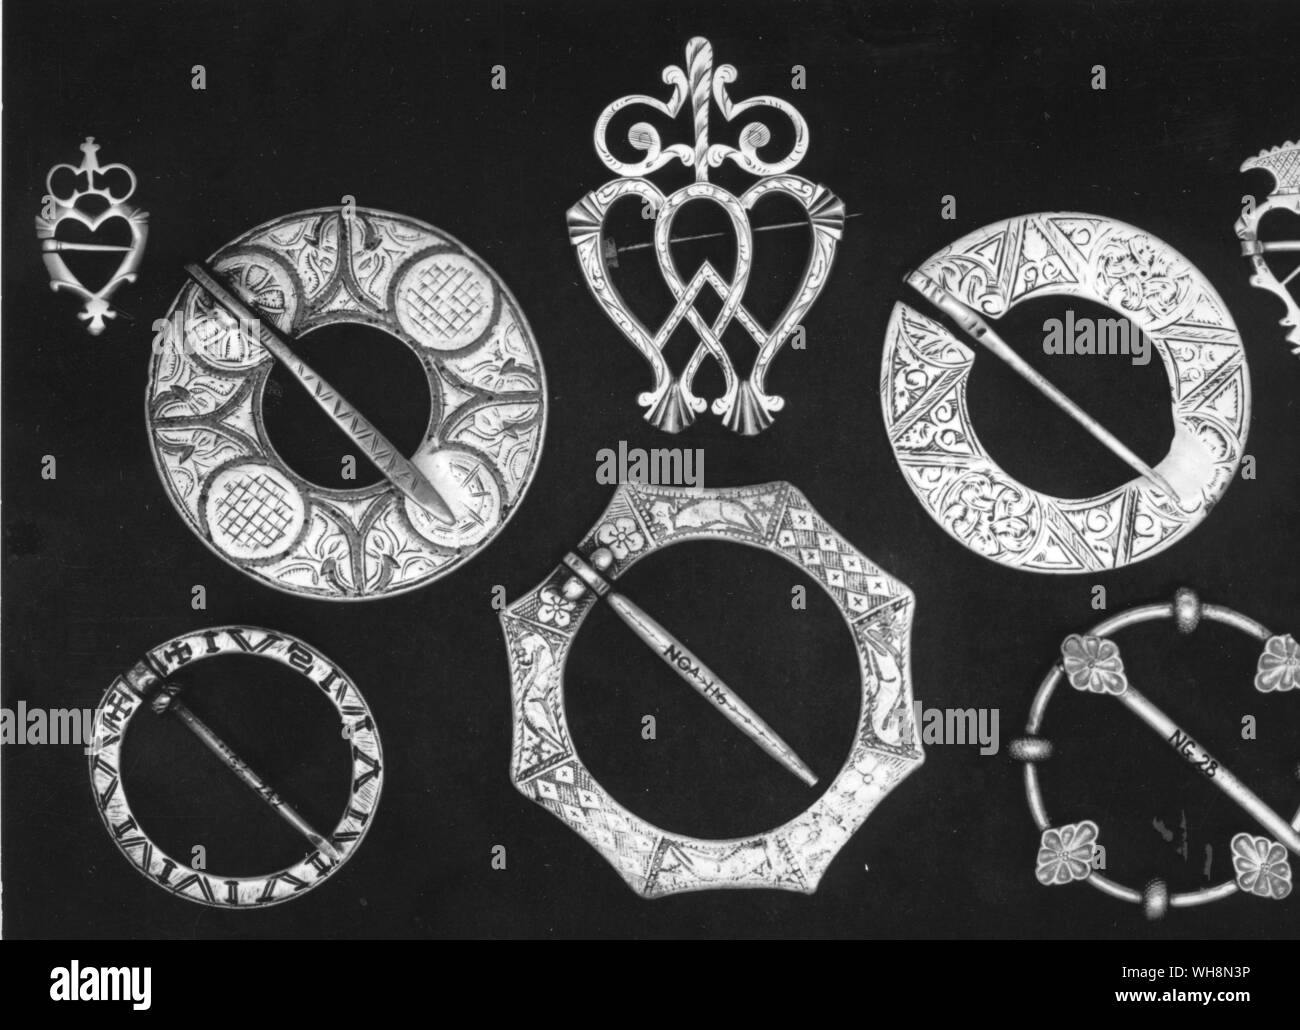 Scottish silver brooches heart shaped 18 and 19 century plaid fasteners (centre) 17 and 18 century talismanic etc (bottom) 14 and 15 century Stock Photo